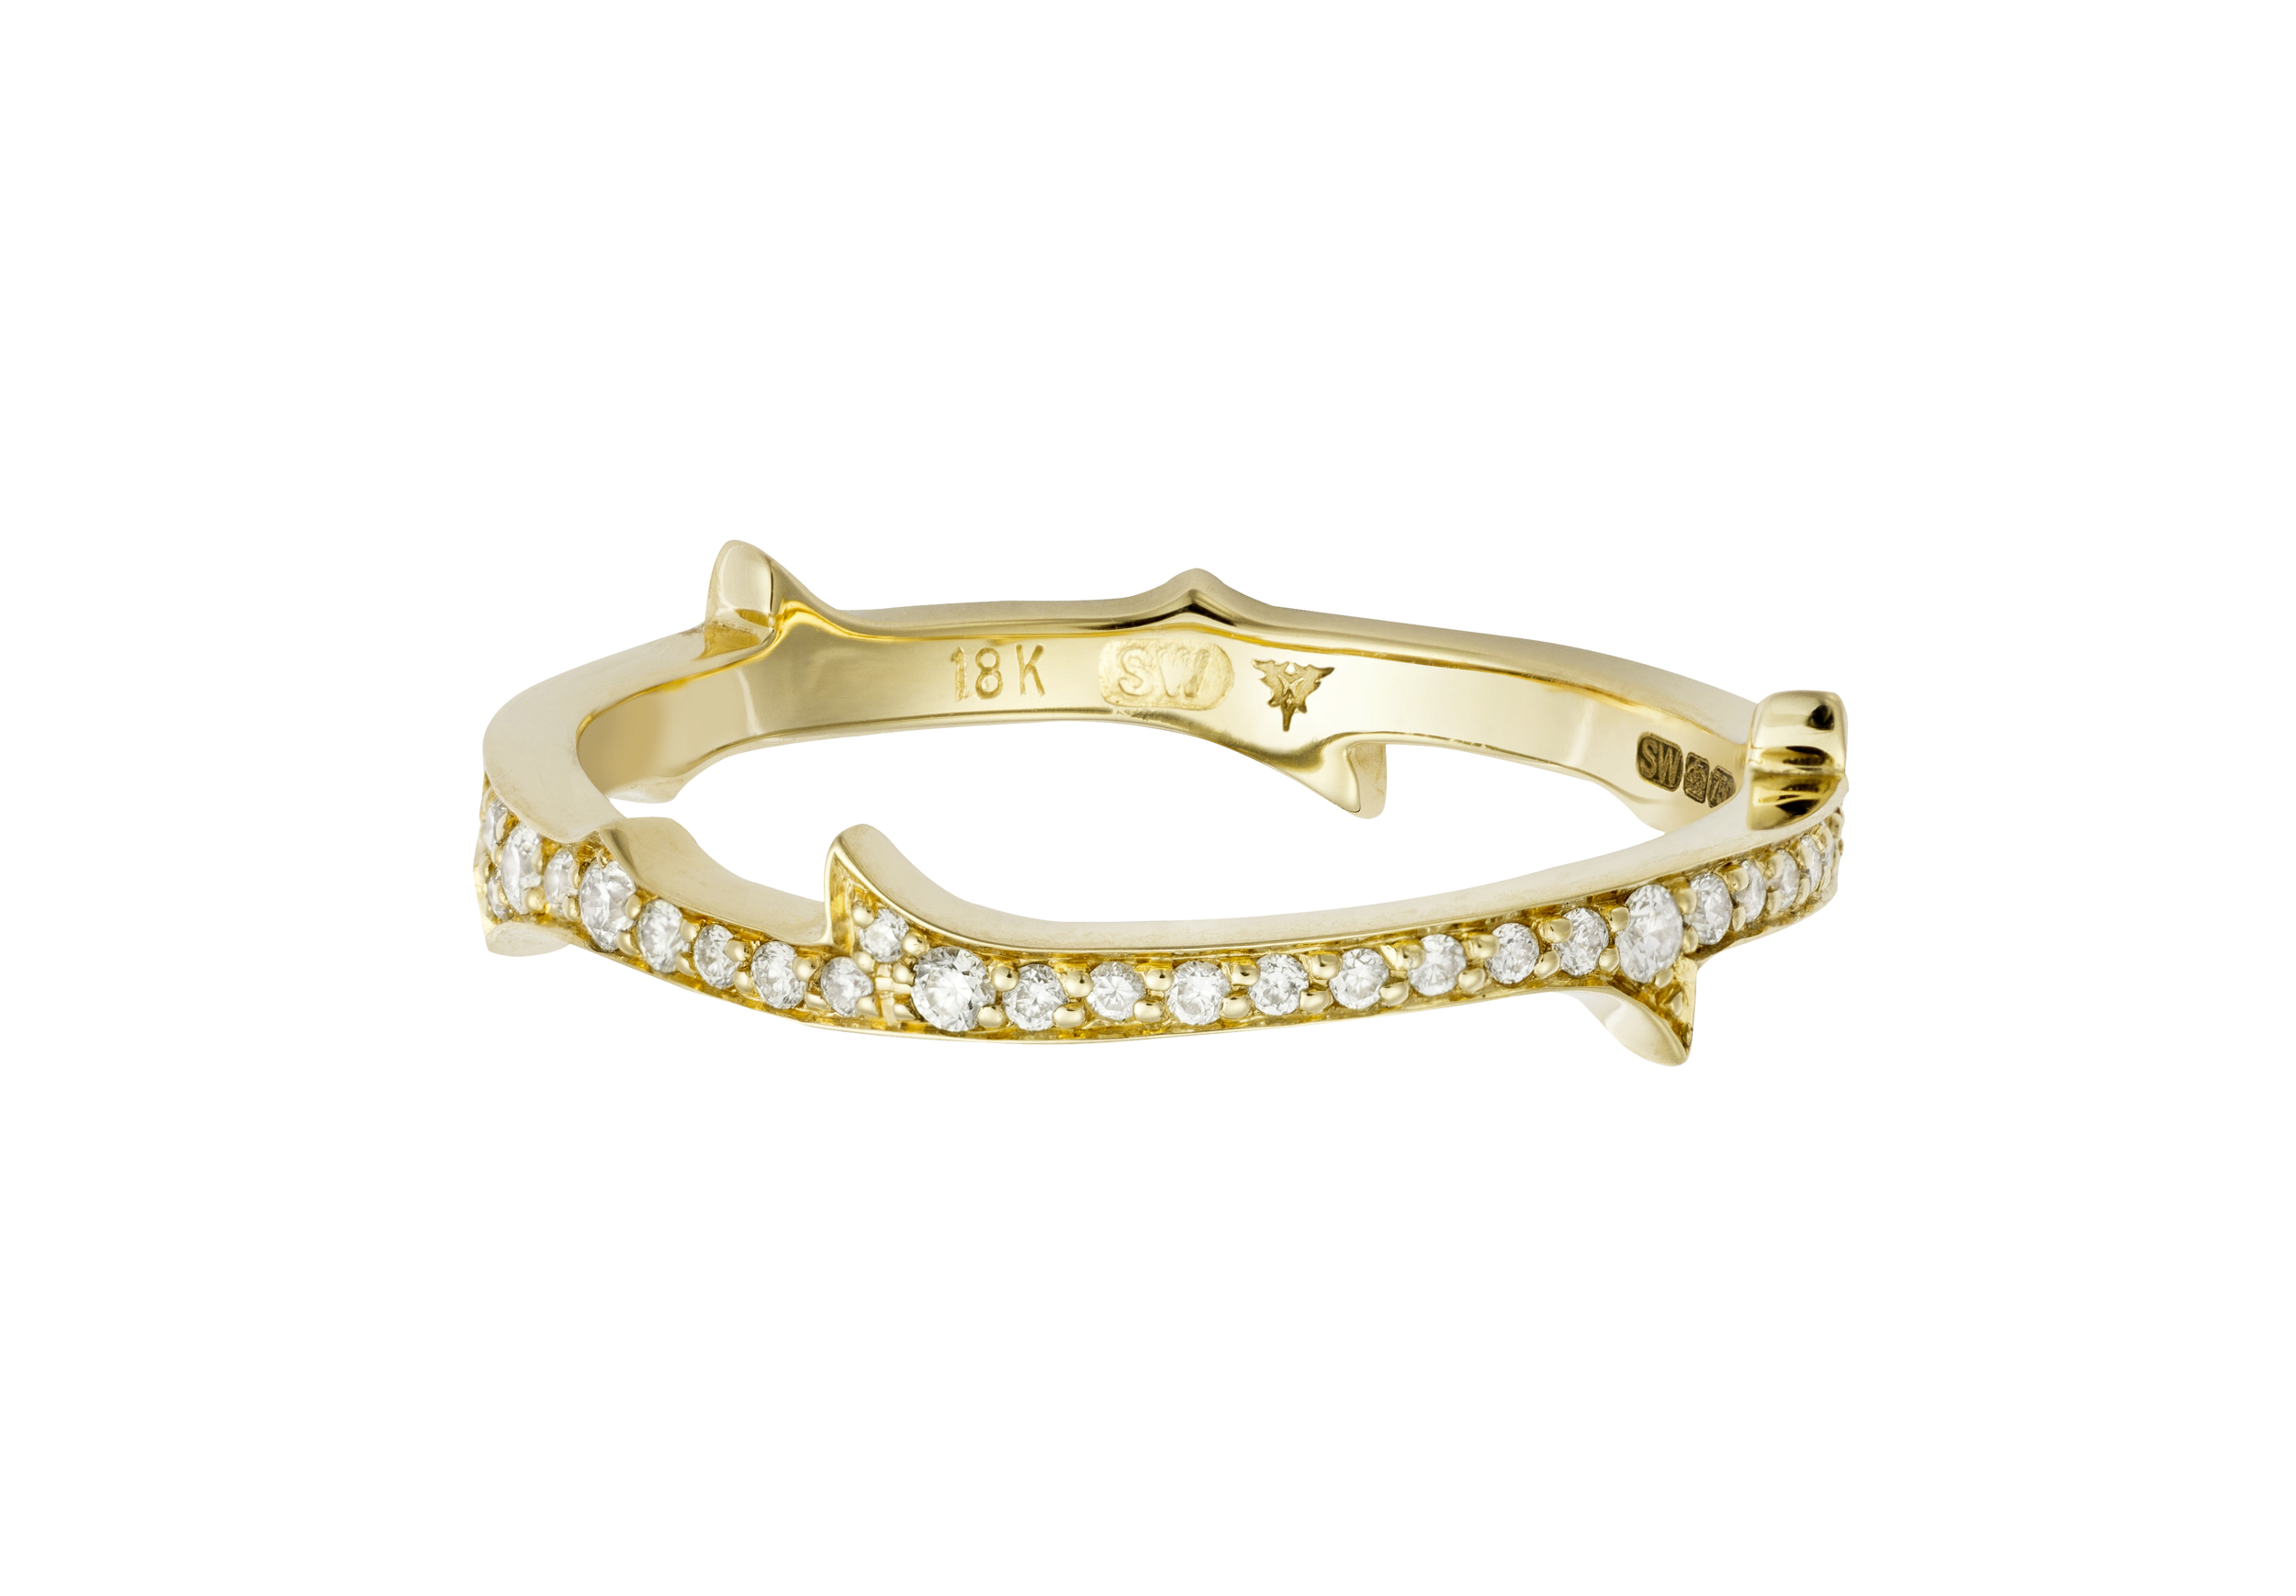 Thorn Stem Slim Band Ring with White Diamonds in 18kt Yellow Gold - Size 7